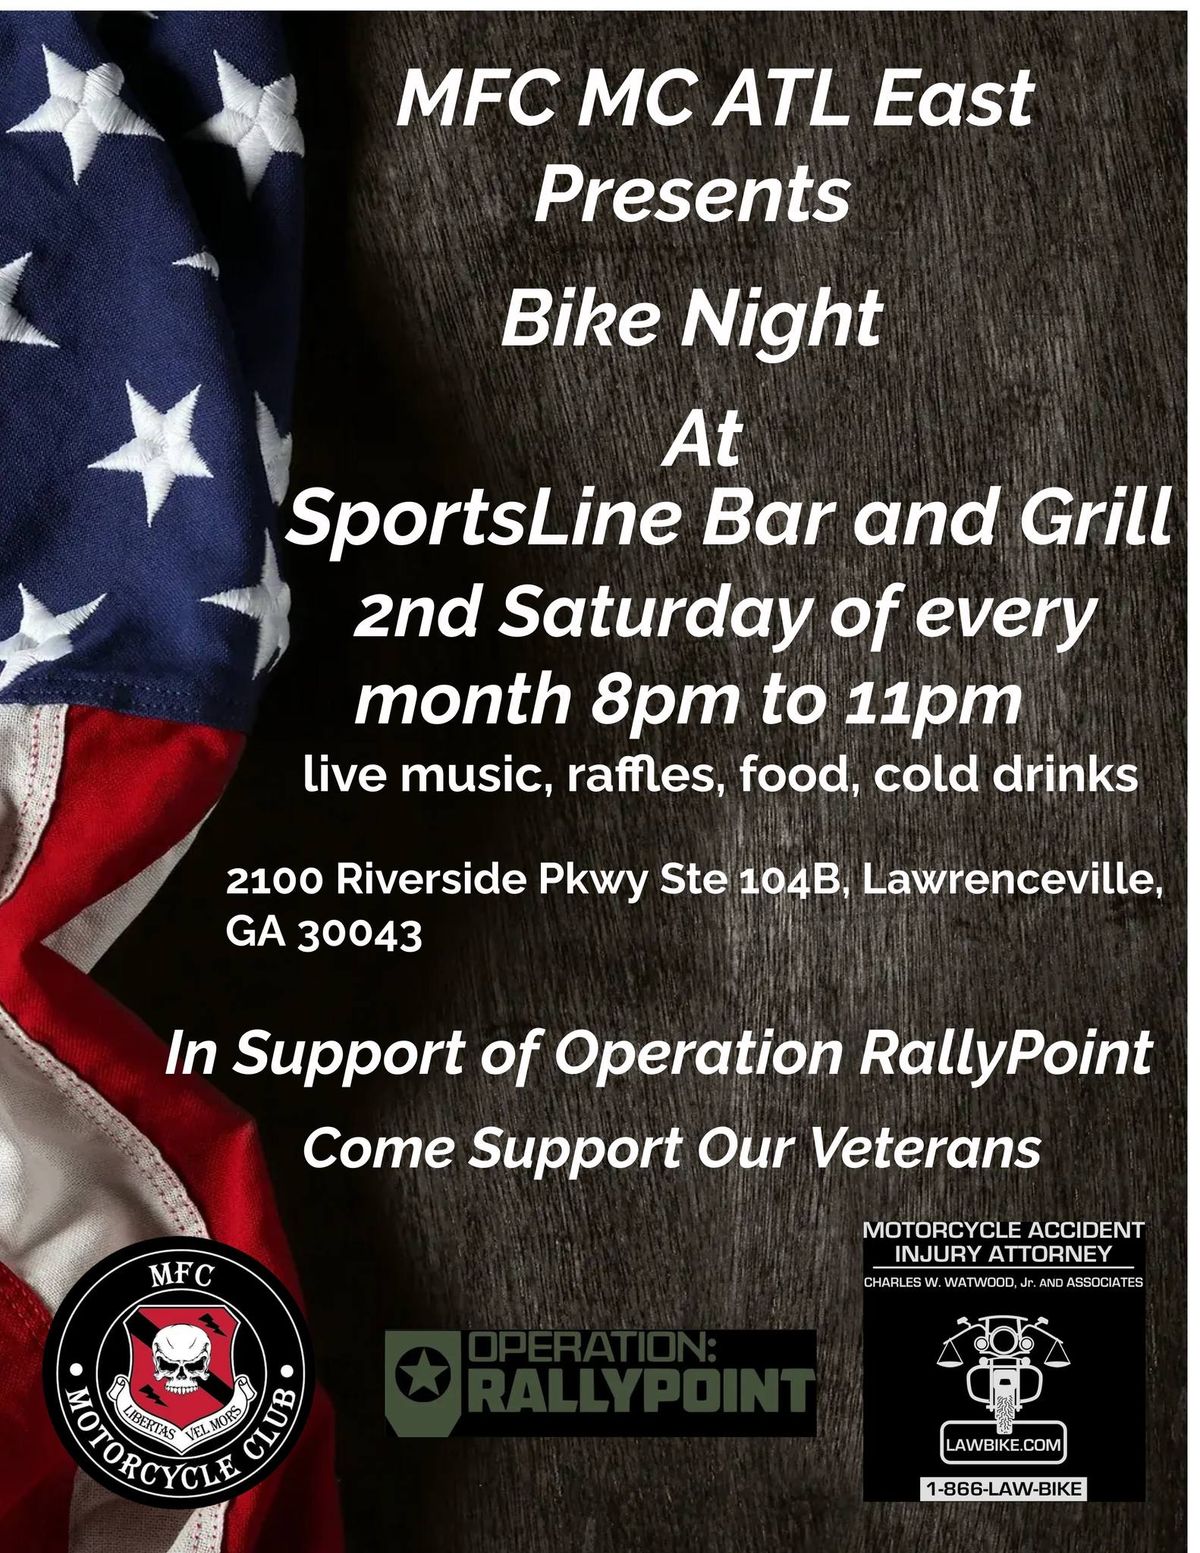 Bike Night At Sportsline Bar and Grill 